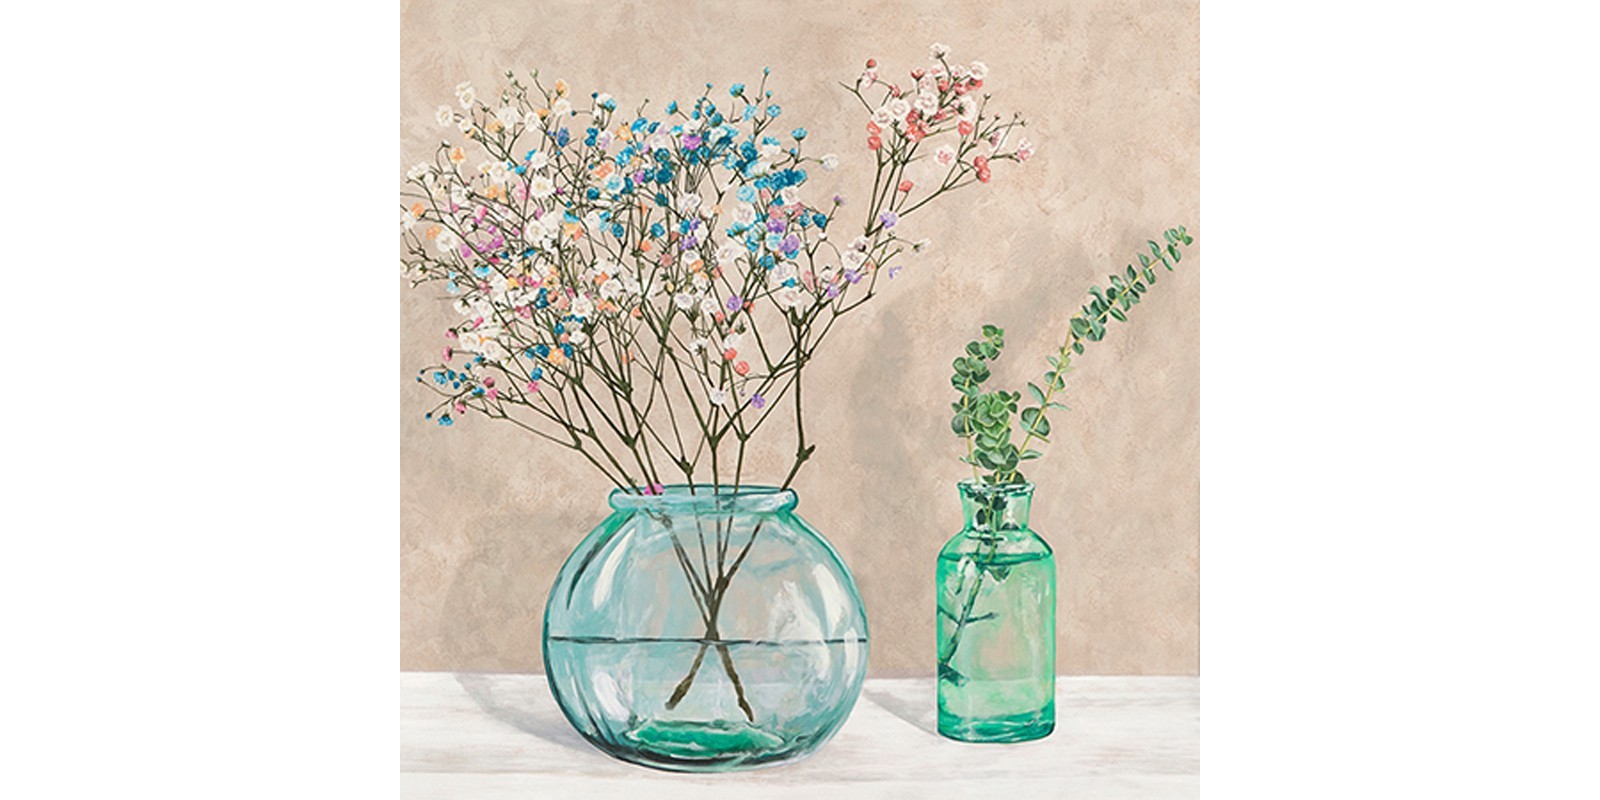 Jenny Thomlinson - Floral setting with glass vases I